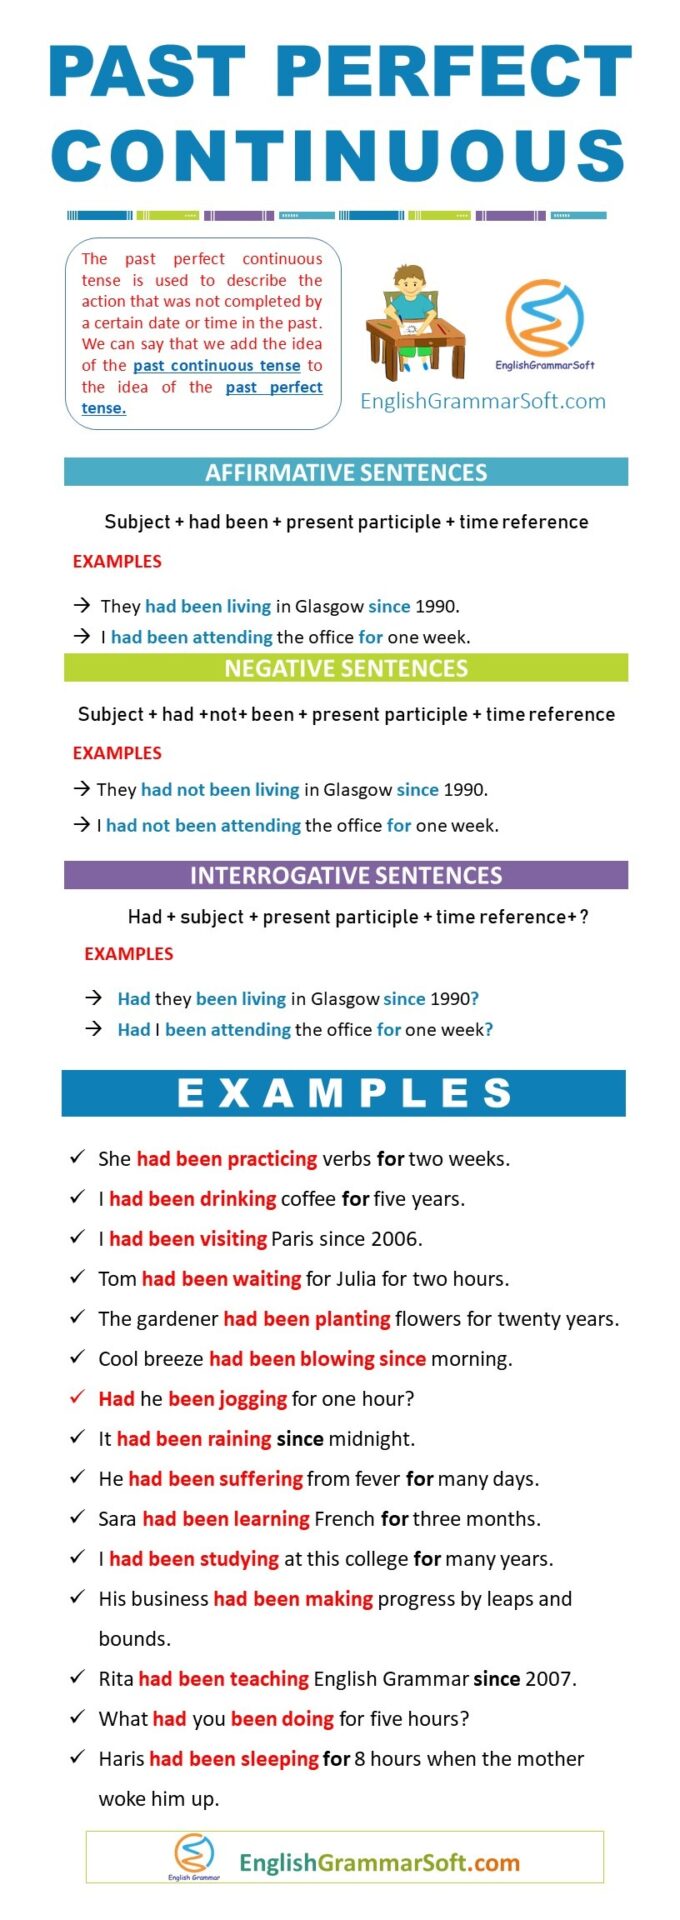 Past Perfect Continuous Tense with Examples